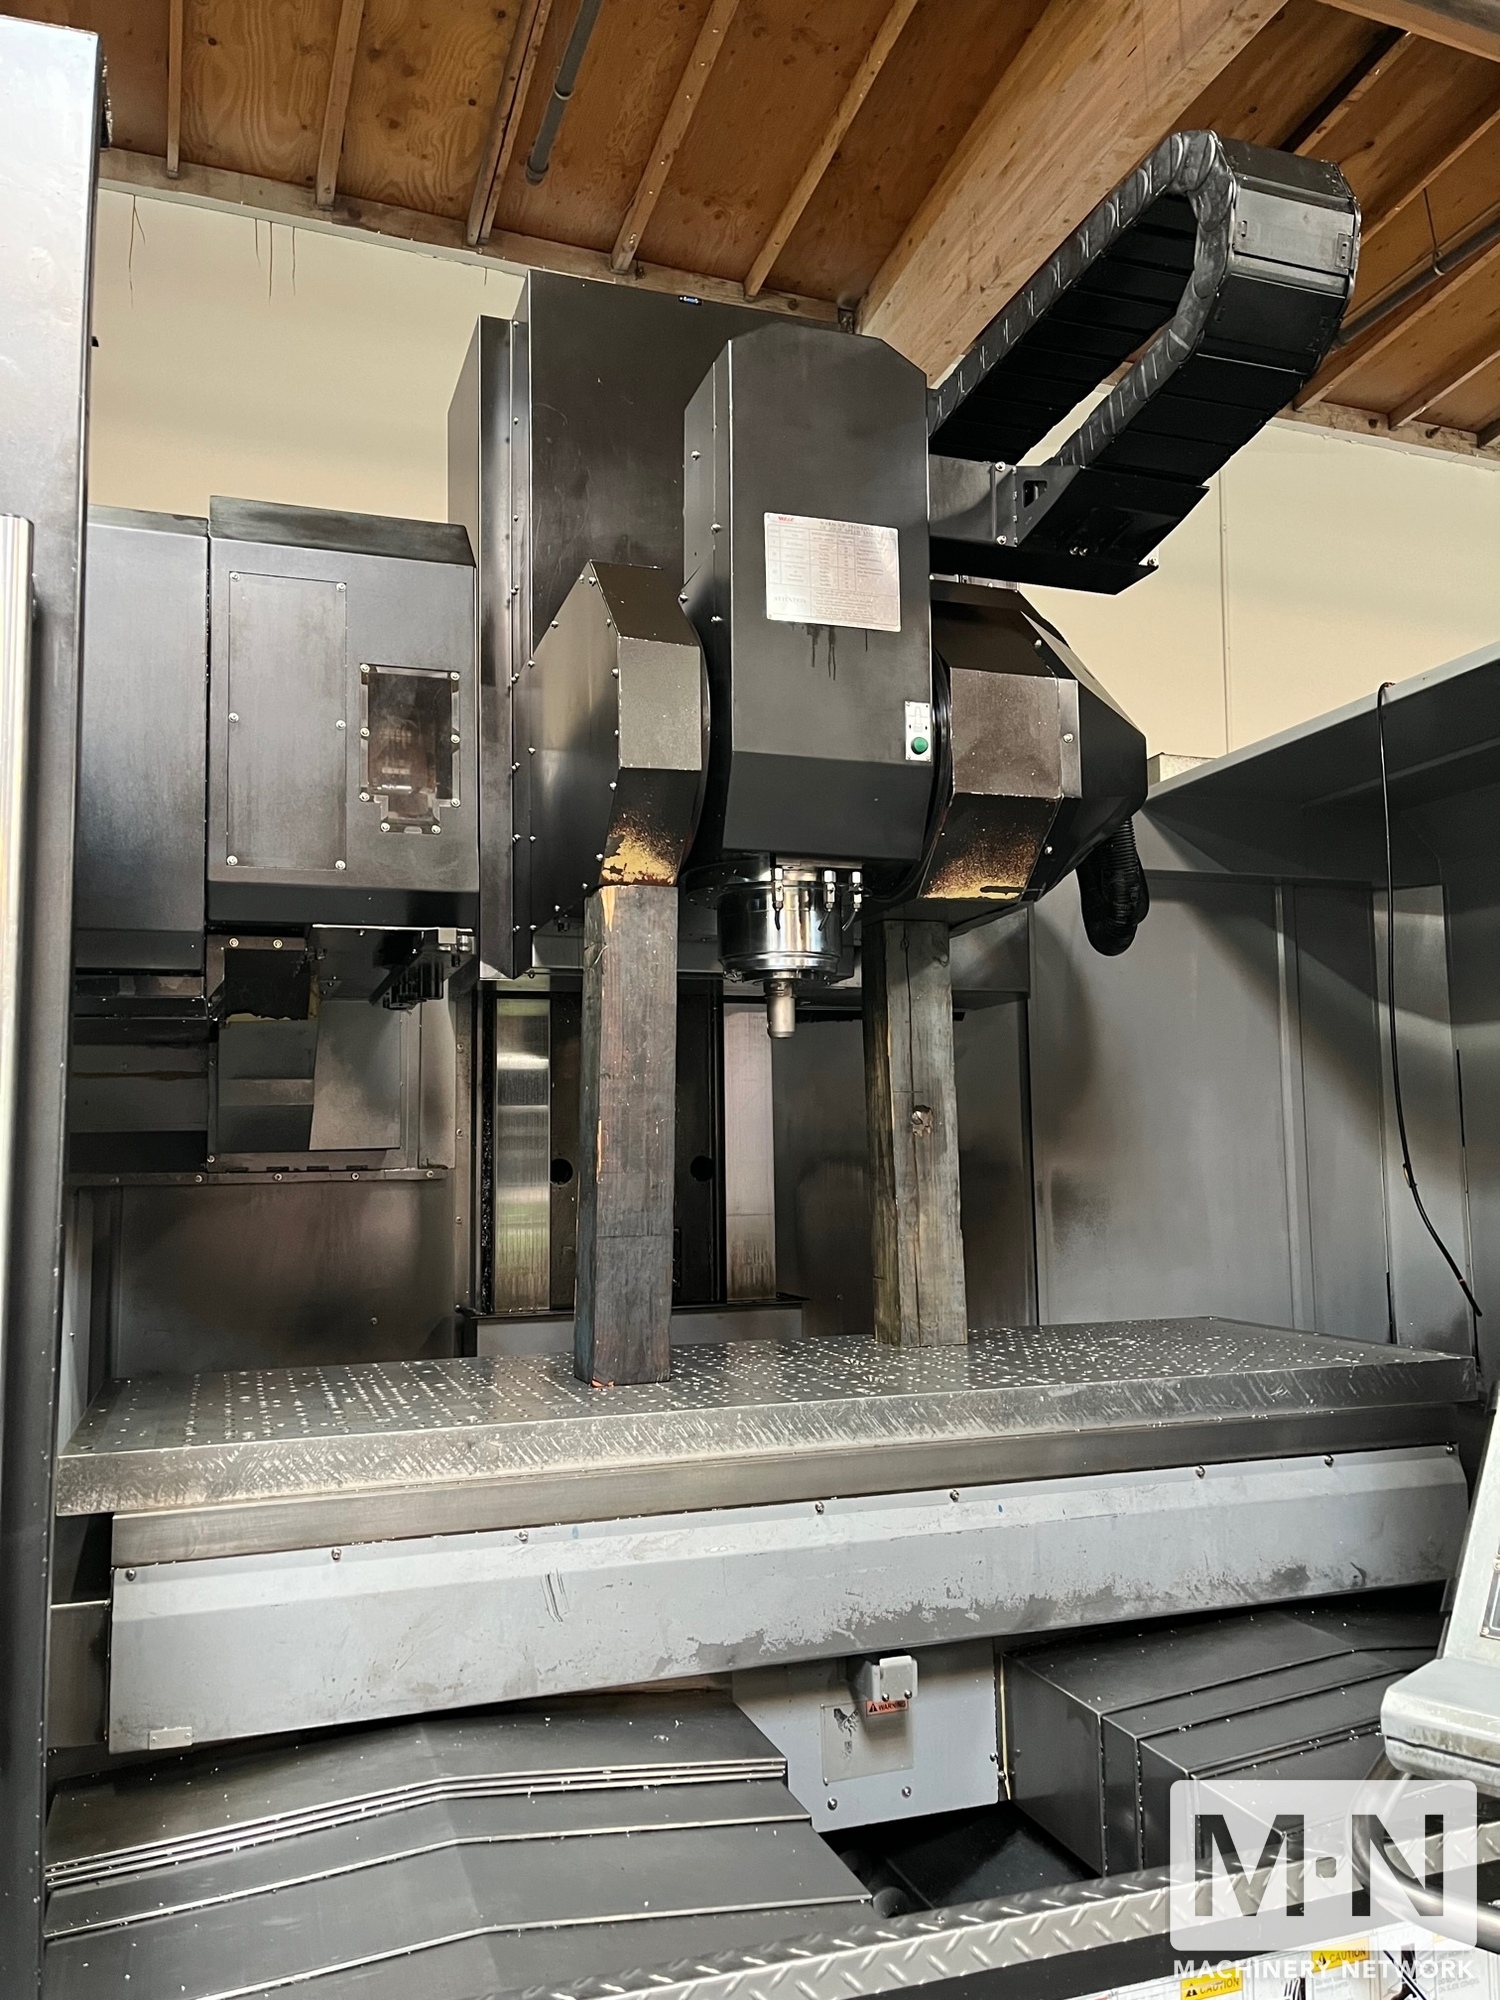 2012 TOYODA UA2090 Vertical Machining Centers (5-Axis or More) | Machinery Network Inc.